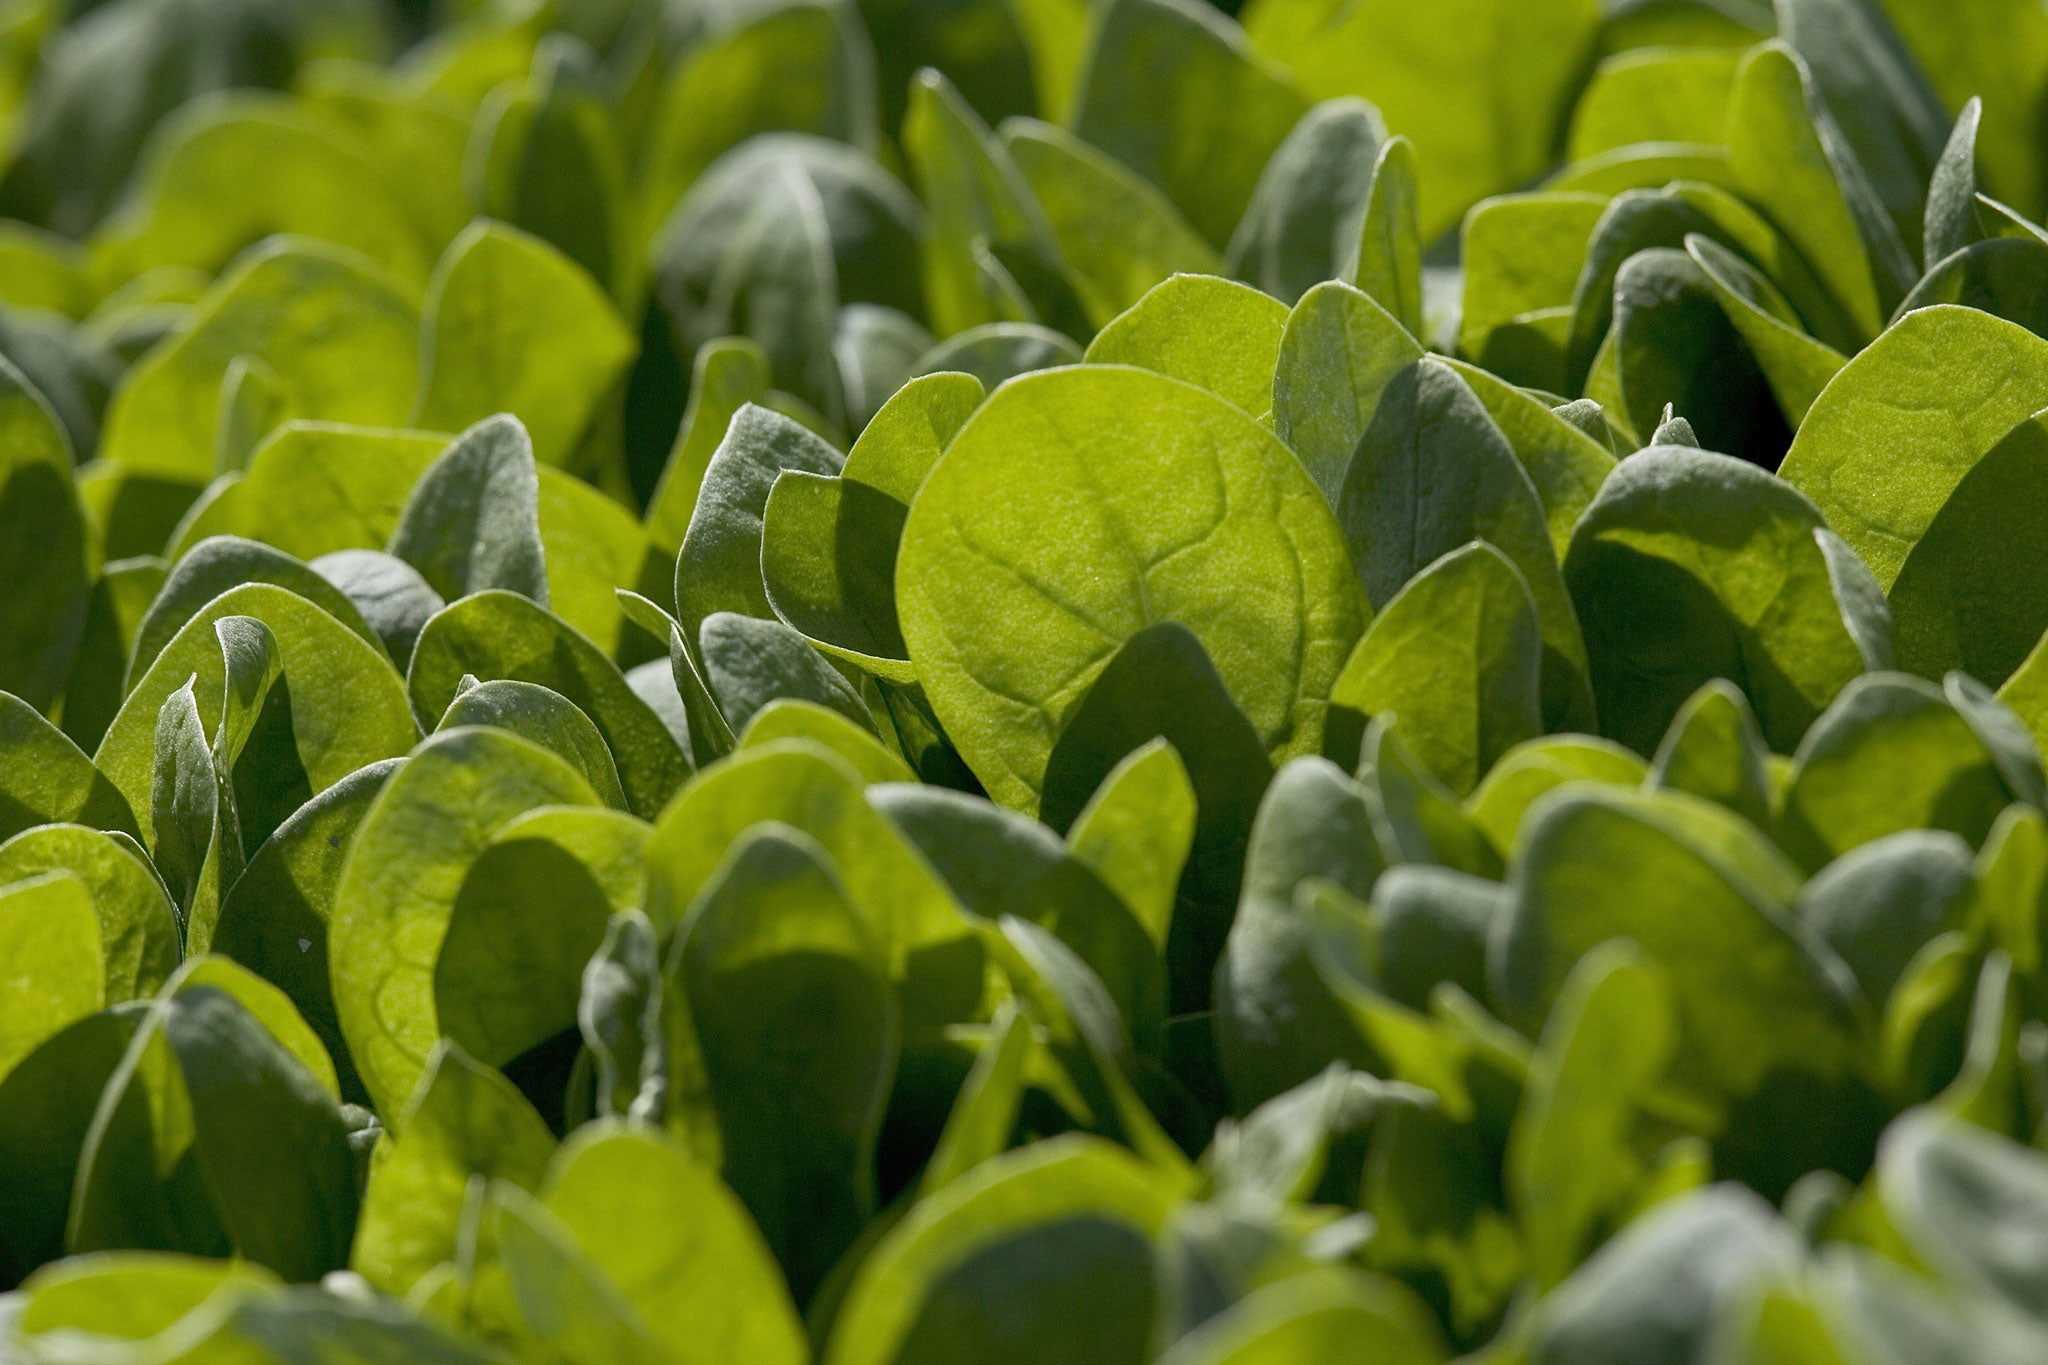 Spinach can been sown every three weeks, from March to August